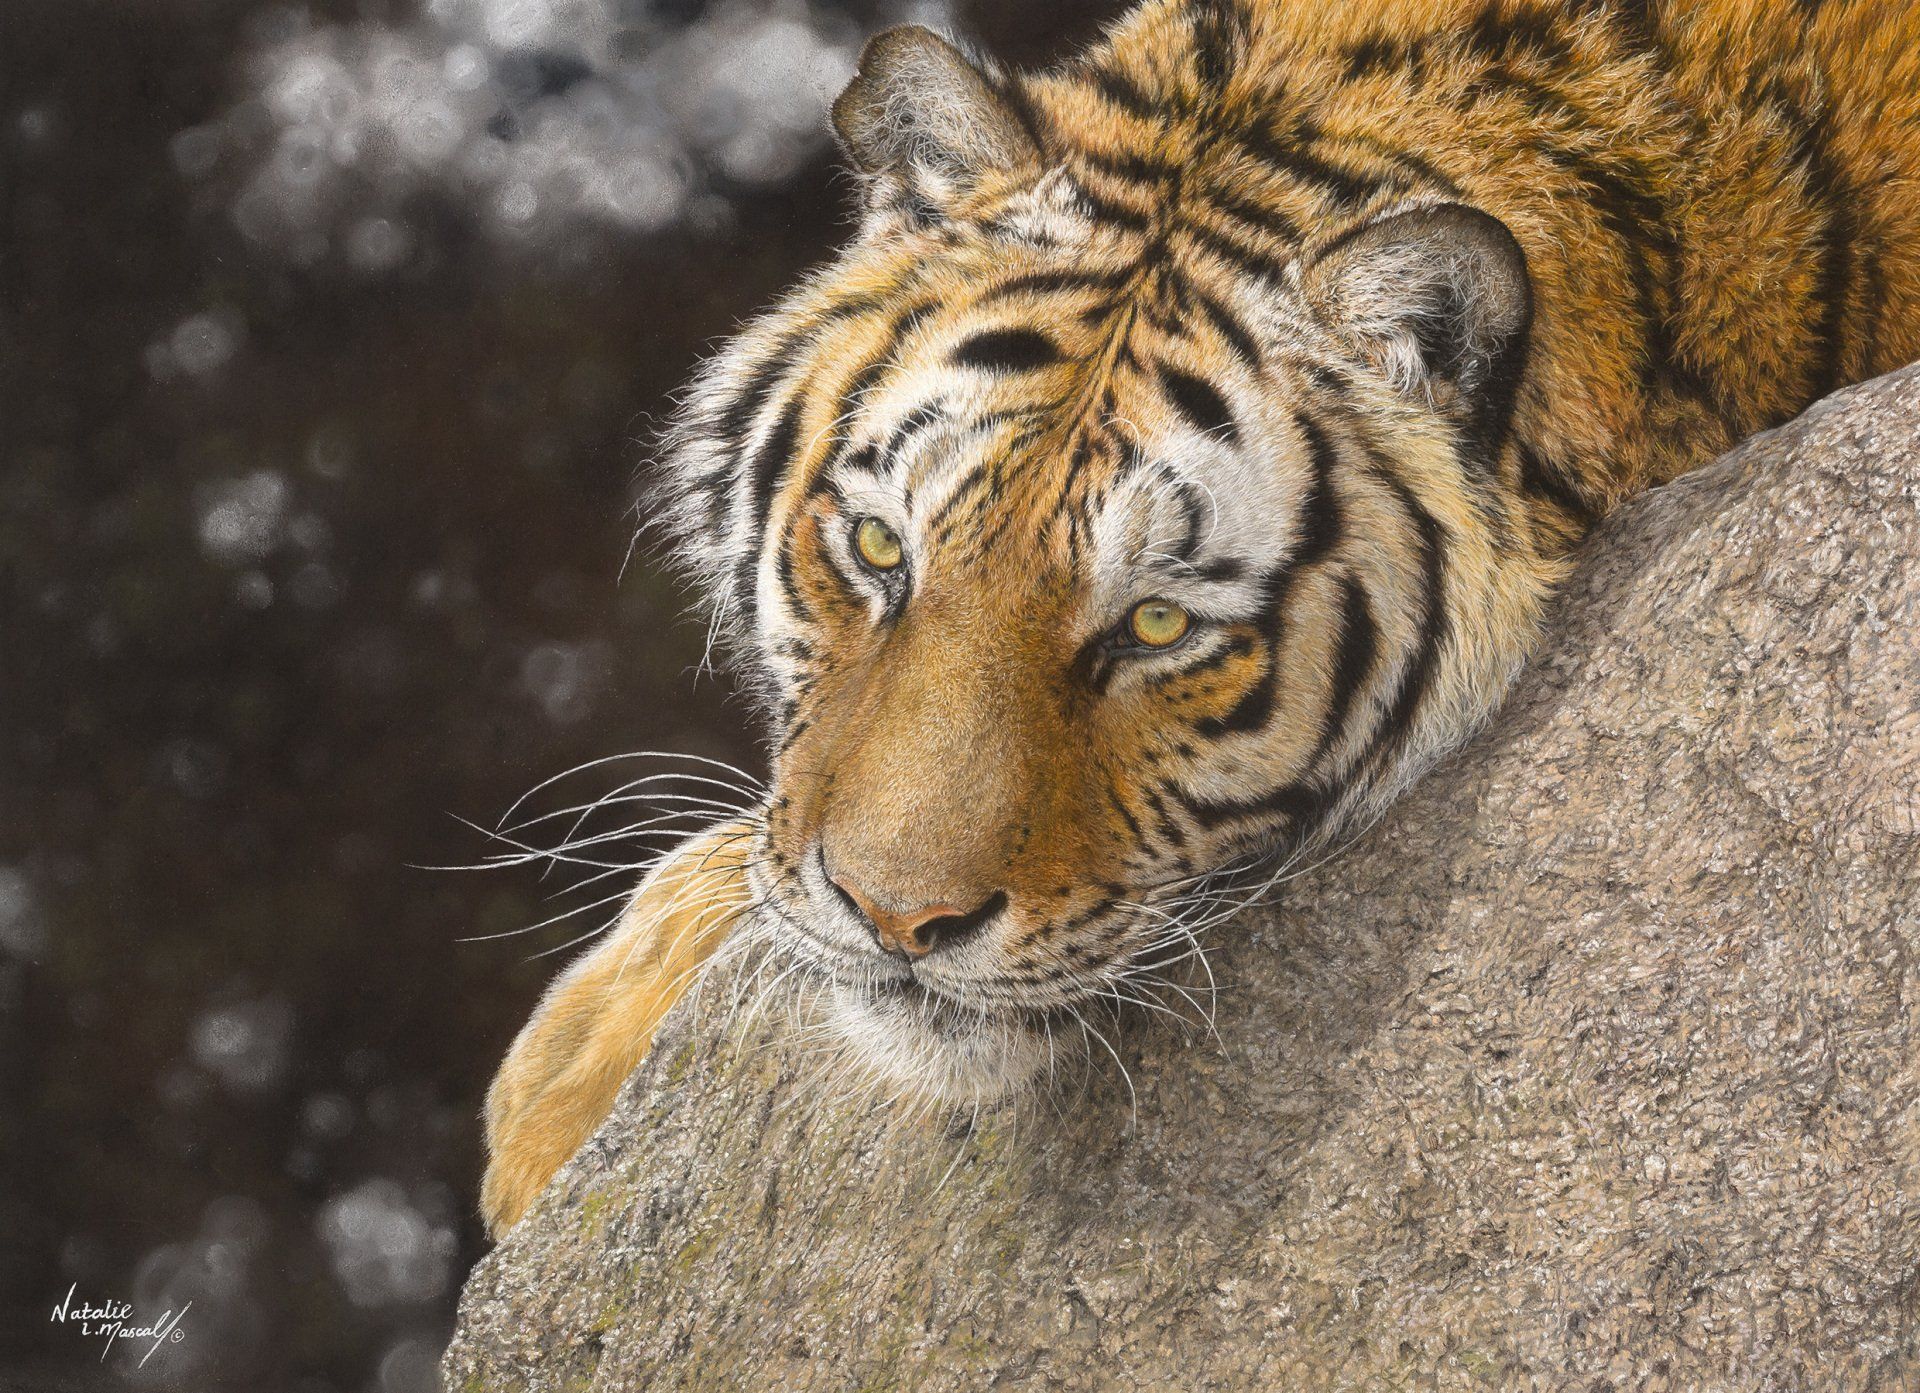 endangered species, tiger on rock, peoples choice winner, WAY, DSWF competition,